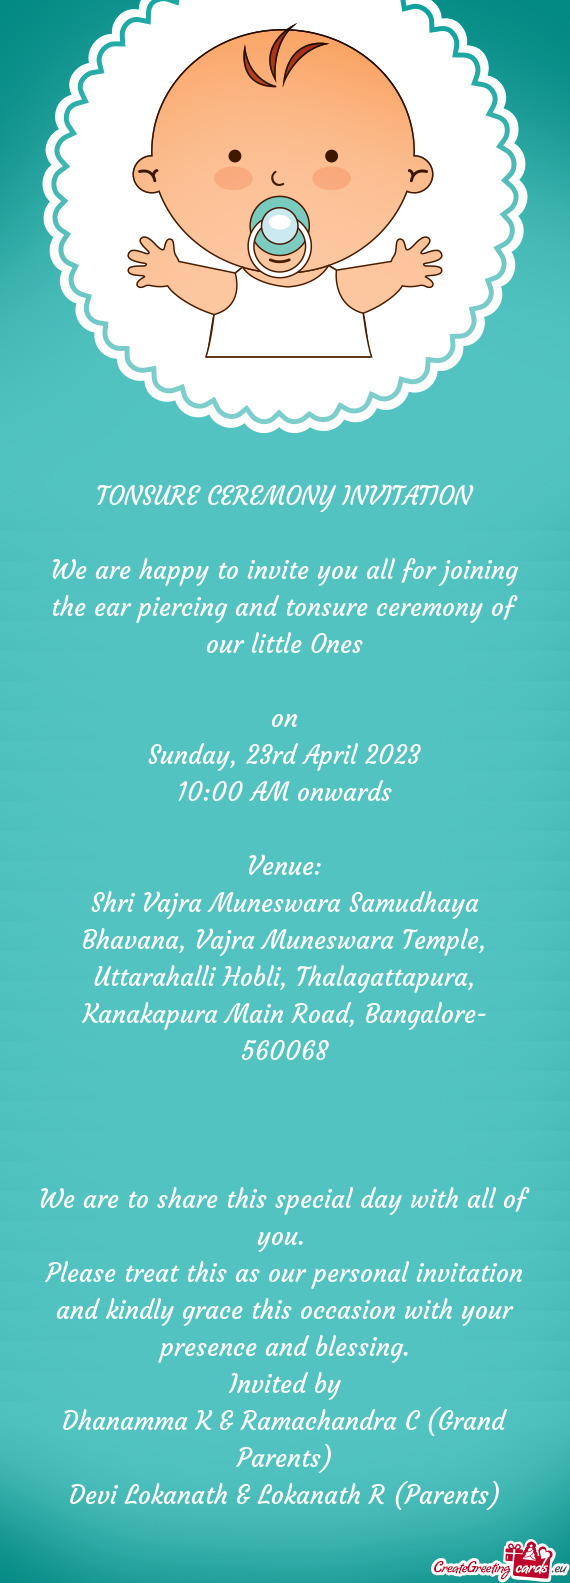 We are happy to invite you all for joining the ear piercing and tonsure ceremony of our little Ones